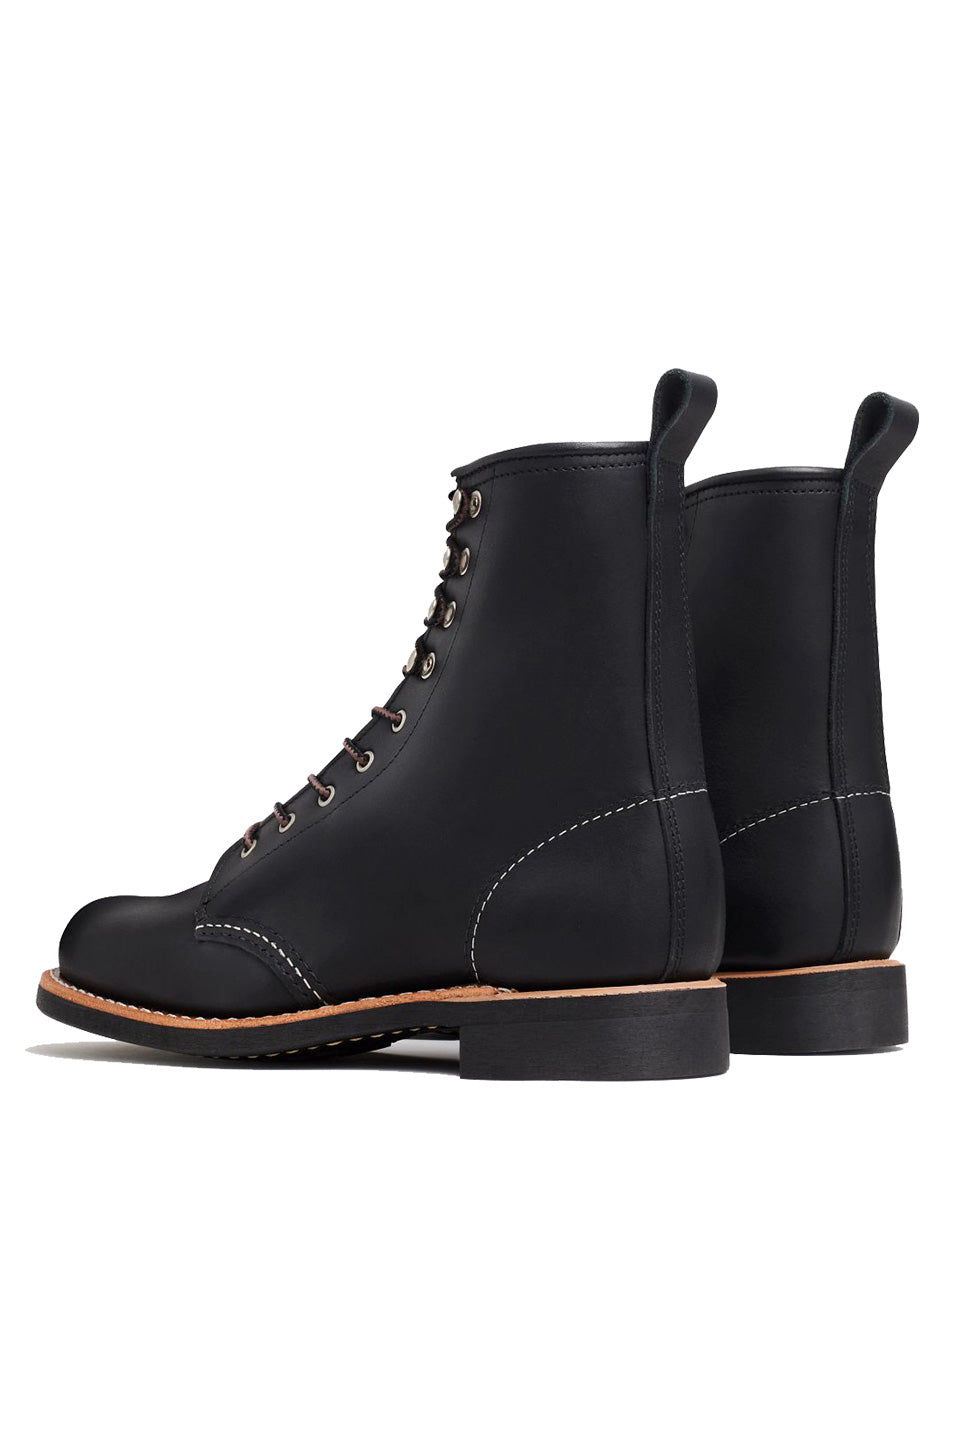 Red Wing - Silversmith - Black Boundary - Back